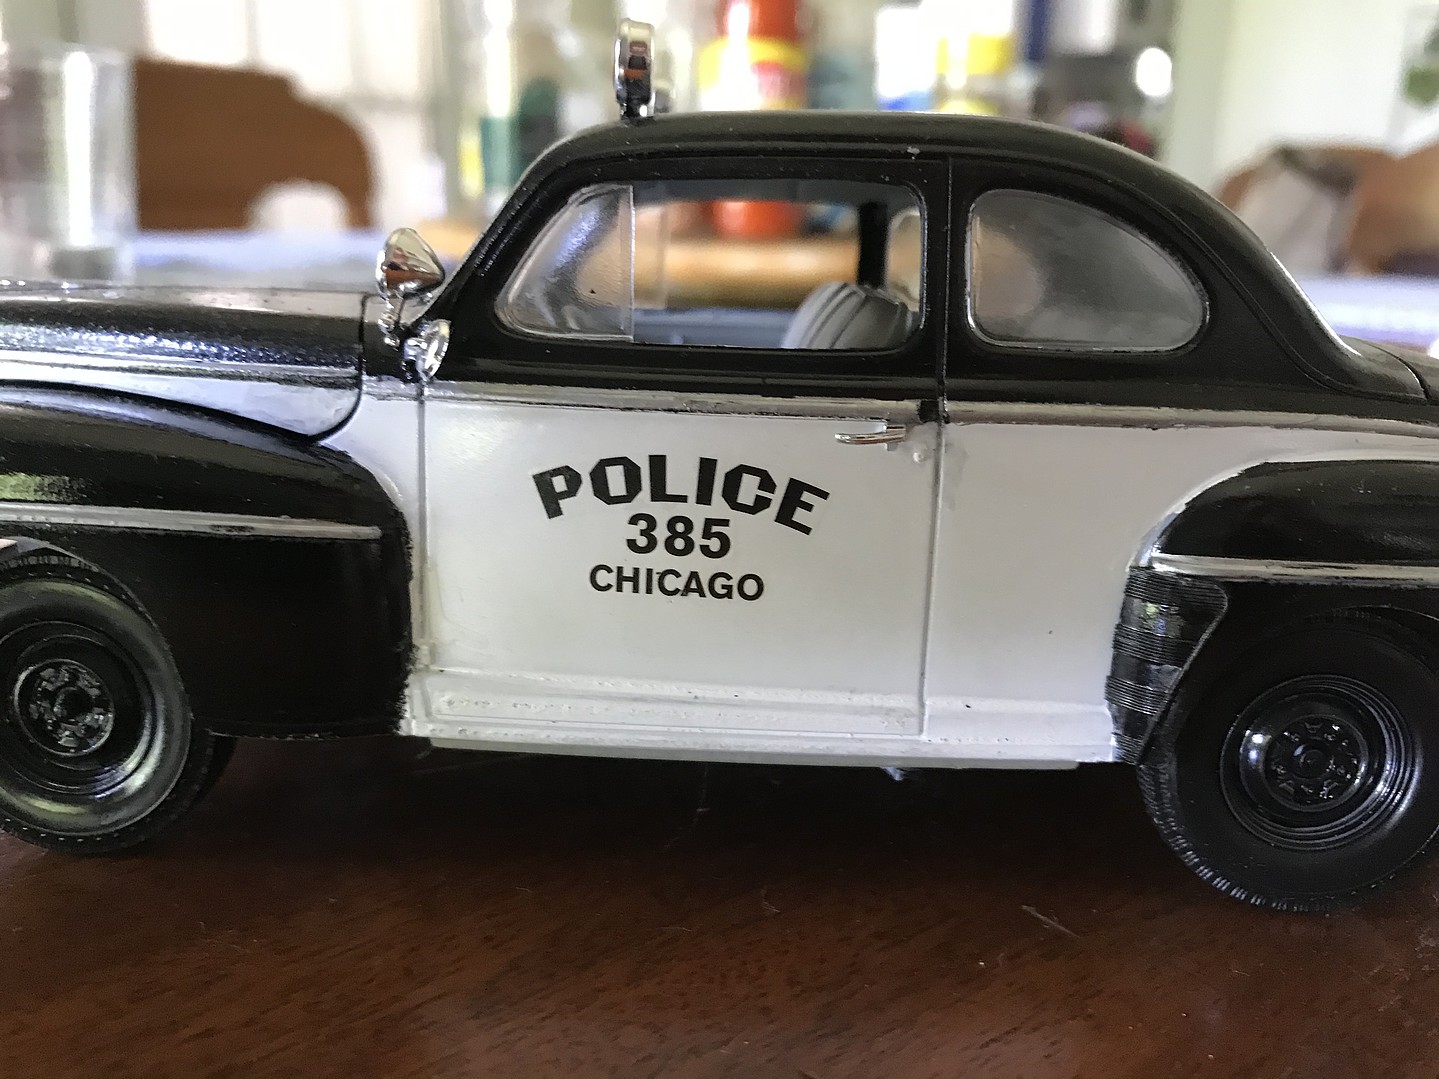 1948 Ford Police Coupe 2n1 -- Plastic Model Car Kit -- 1/25 Scale 